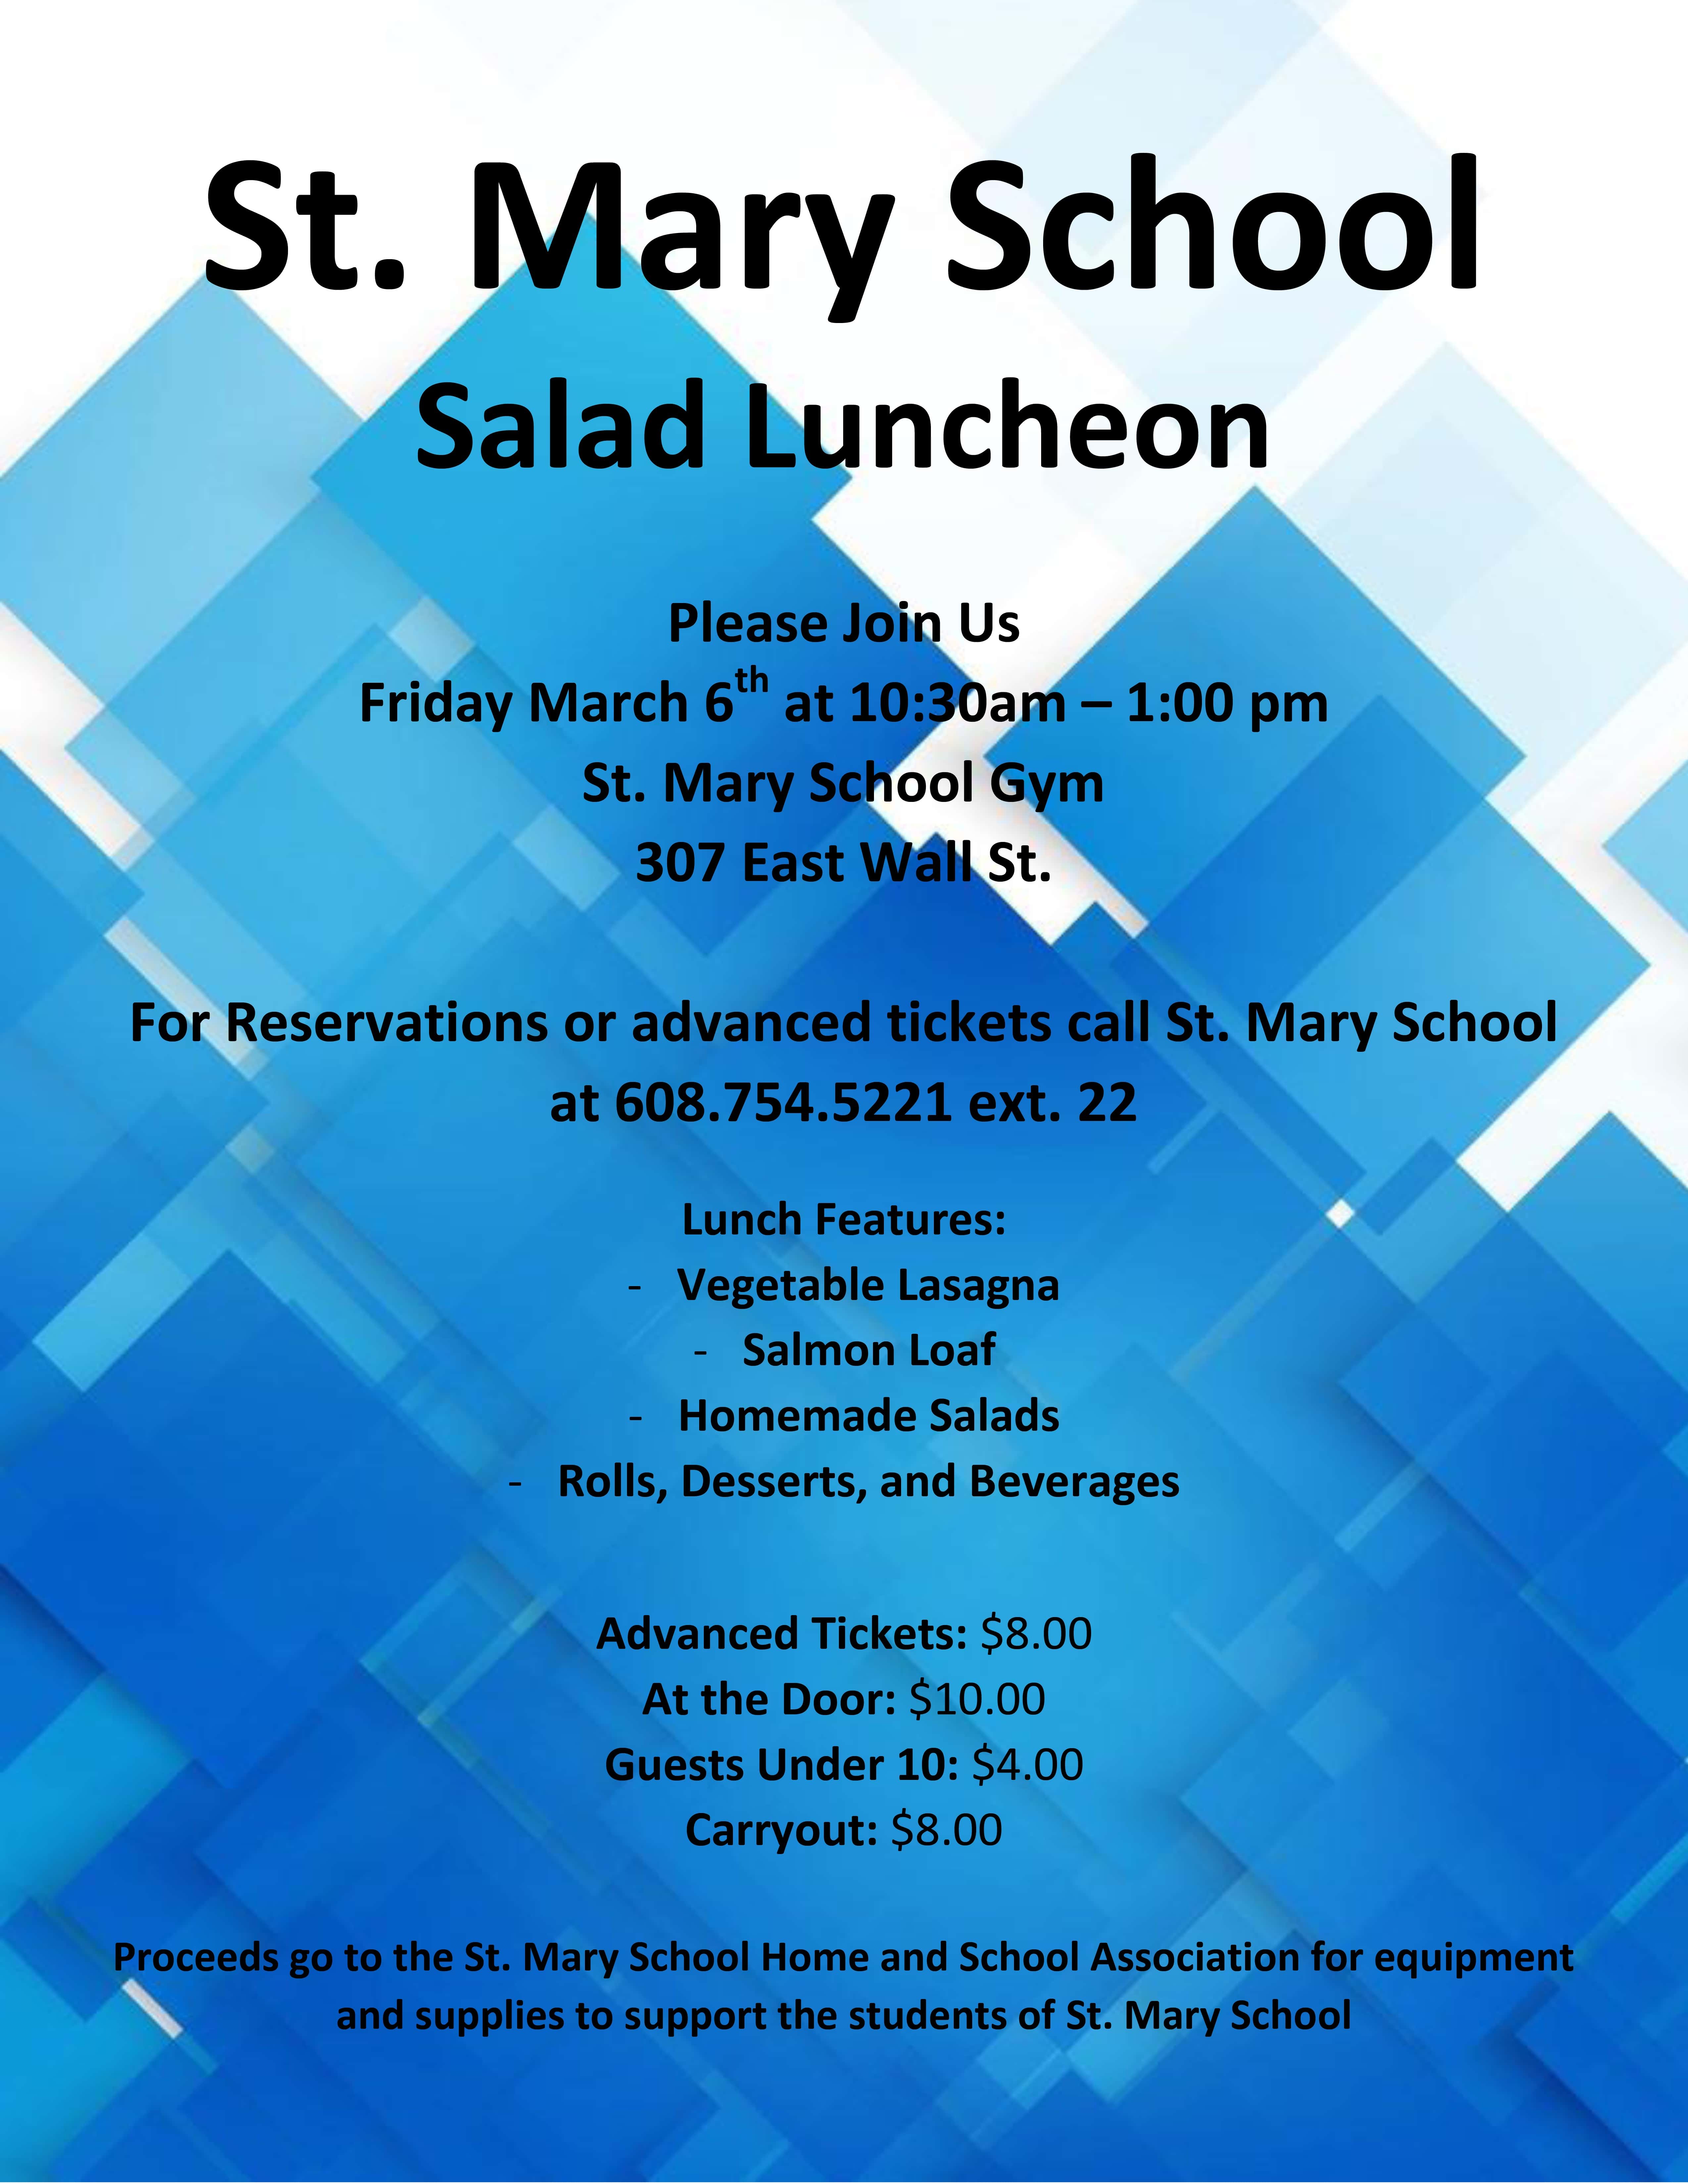 2020_salad-luncheon-poster3_0001